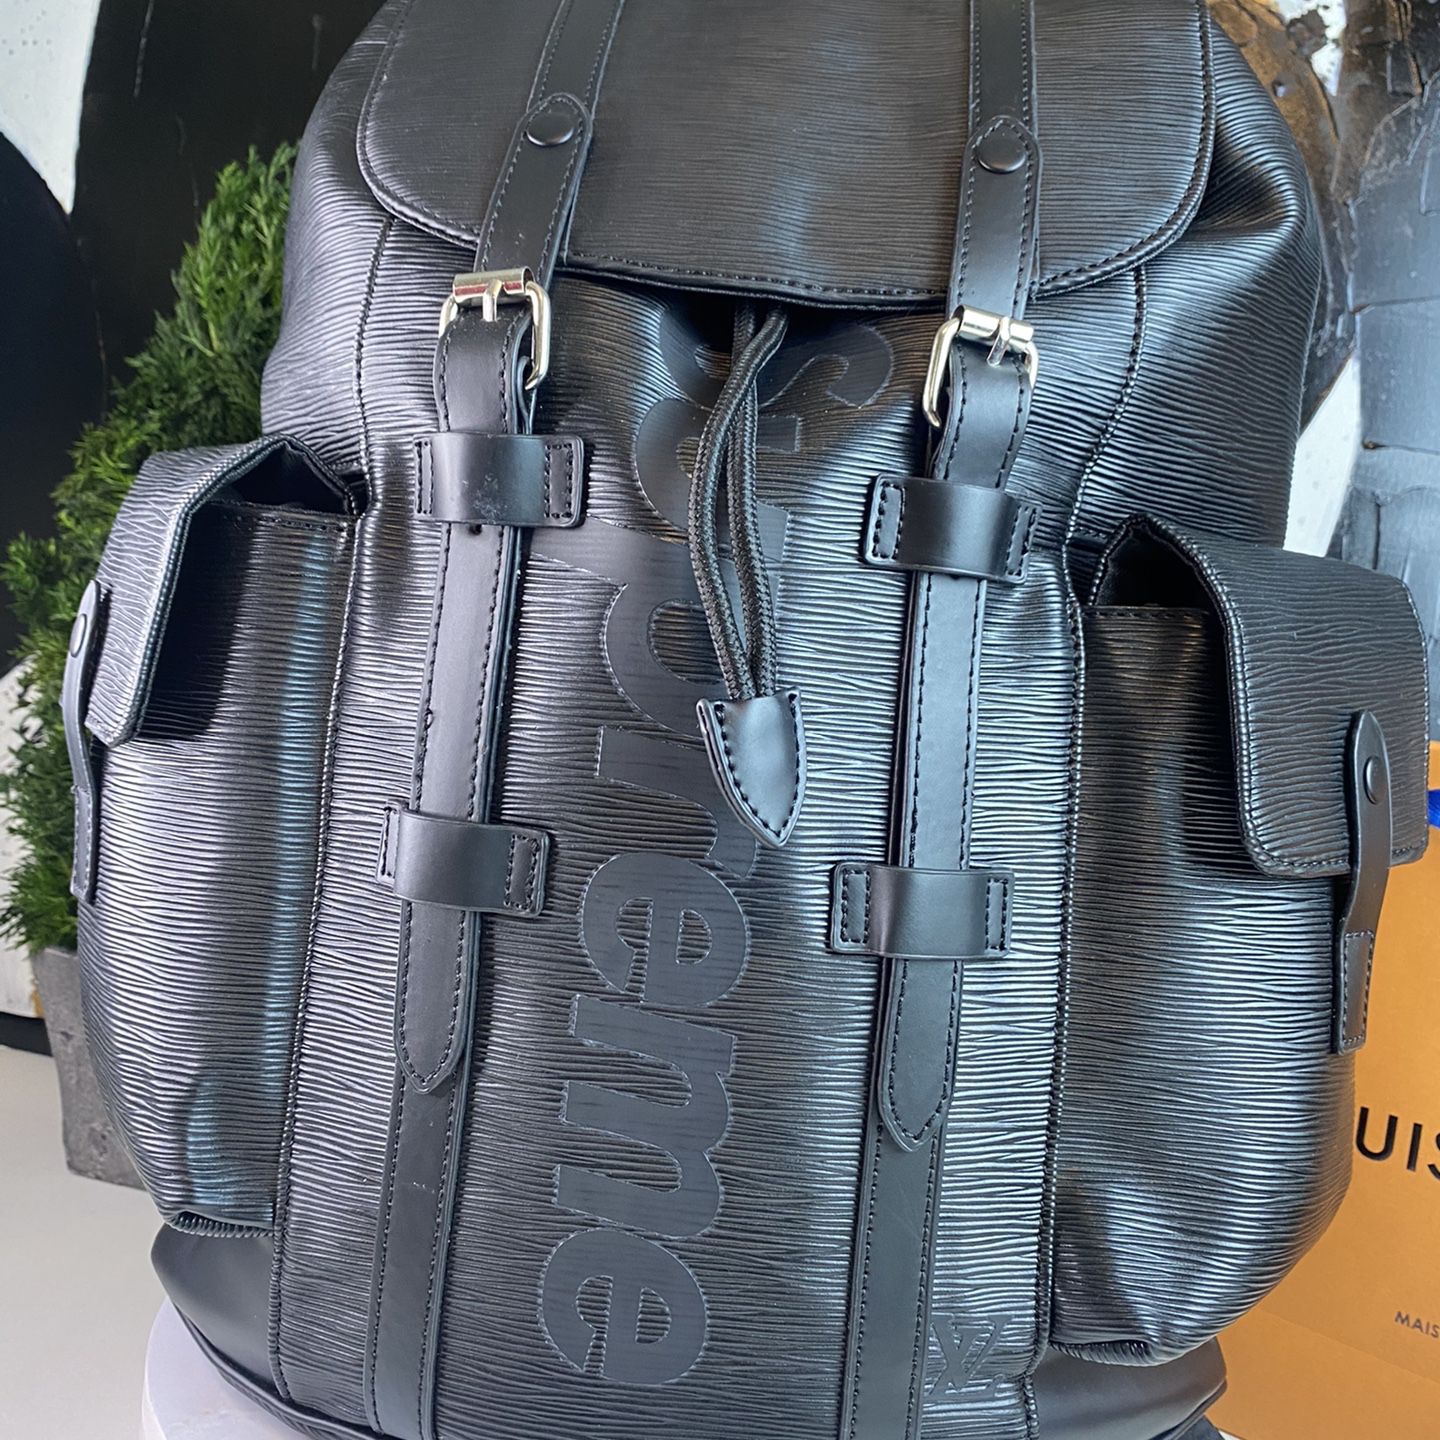 Supreme Louis Vuitton Backpack for Sale in Queen Creek, AZ